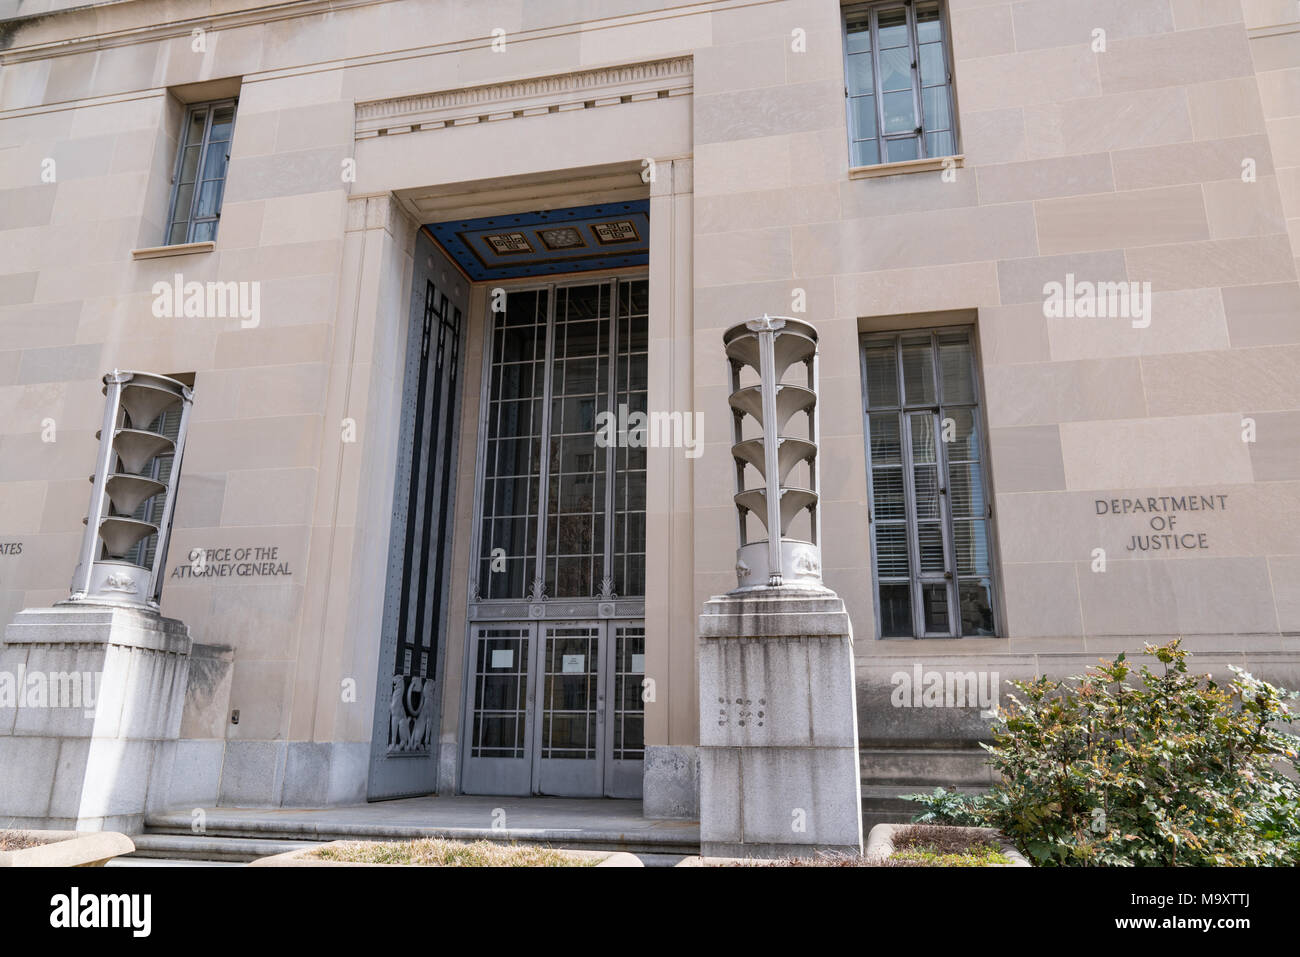 WASHINGTON, DC - MARCH 14, 2018: Exterior facade of the Department of Justice Building in Washington, DC Stock Photo